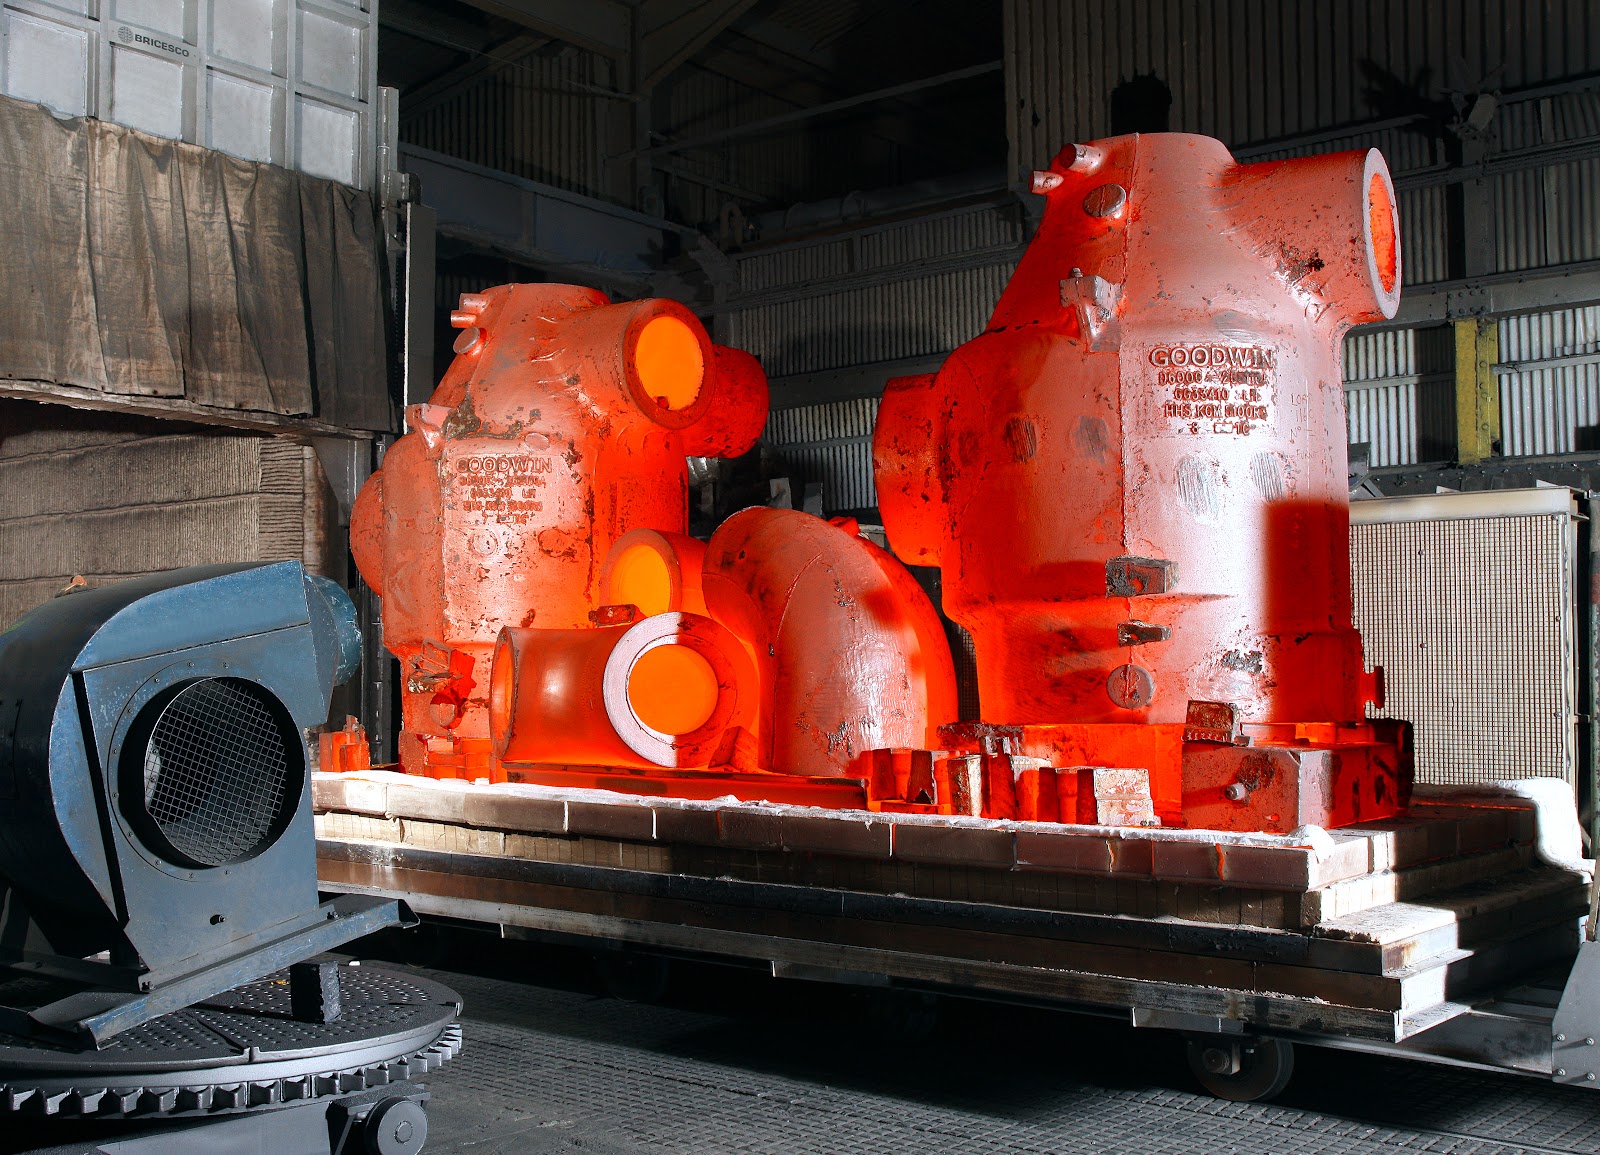 Annealing: The Heat Treatment Process for Stronger and More Ductile Materials